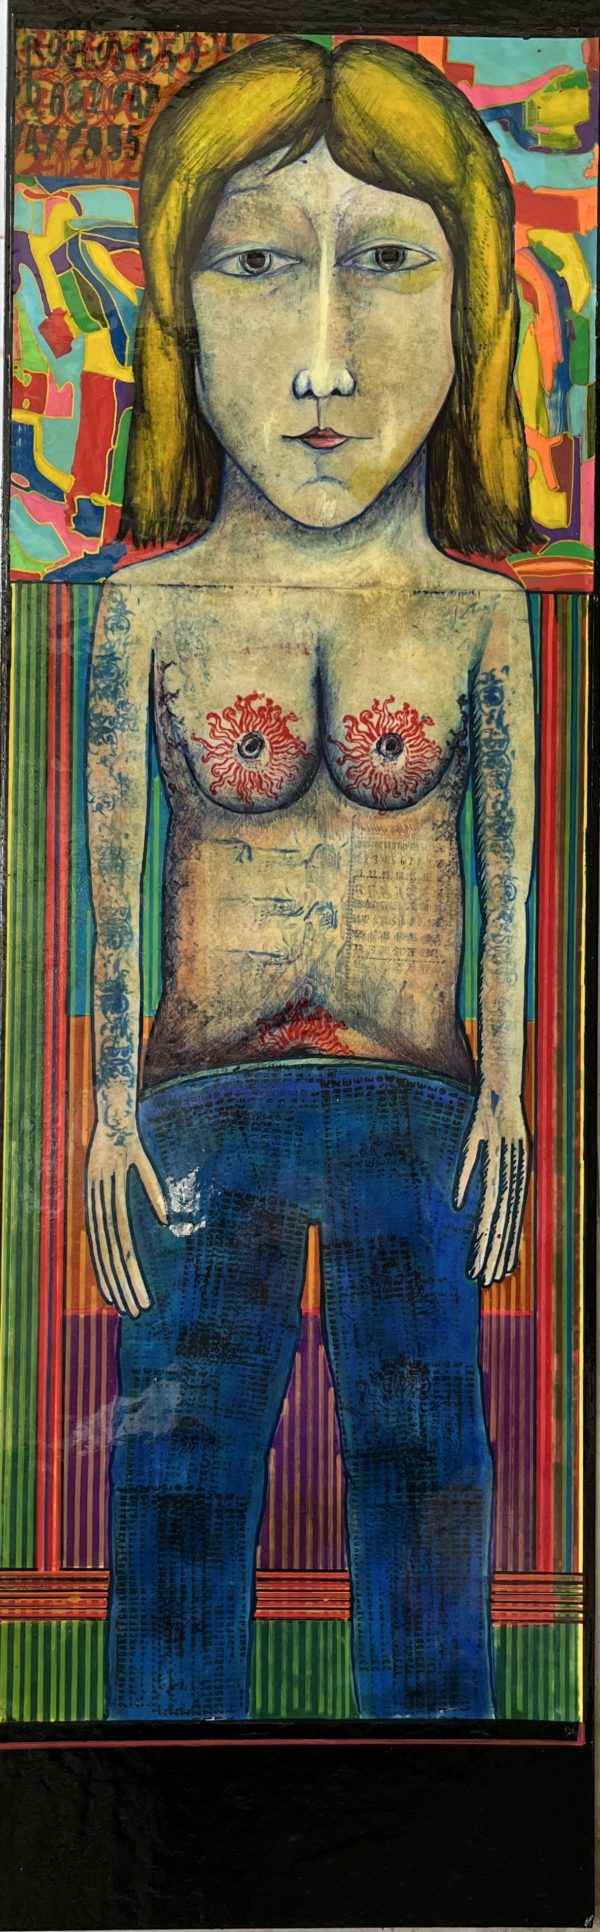 Fiery Woman - Faux naïf drawings, collages, paintings, envelopes by Jean-Luc Farquet